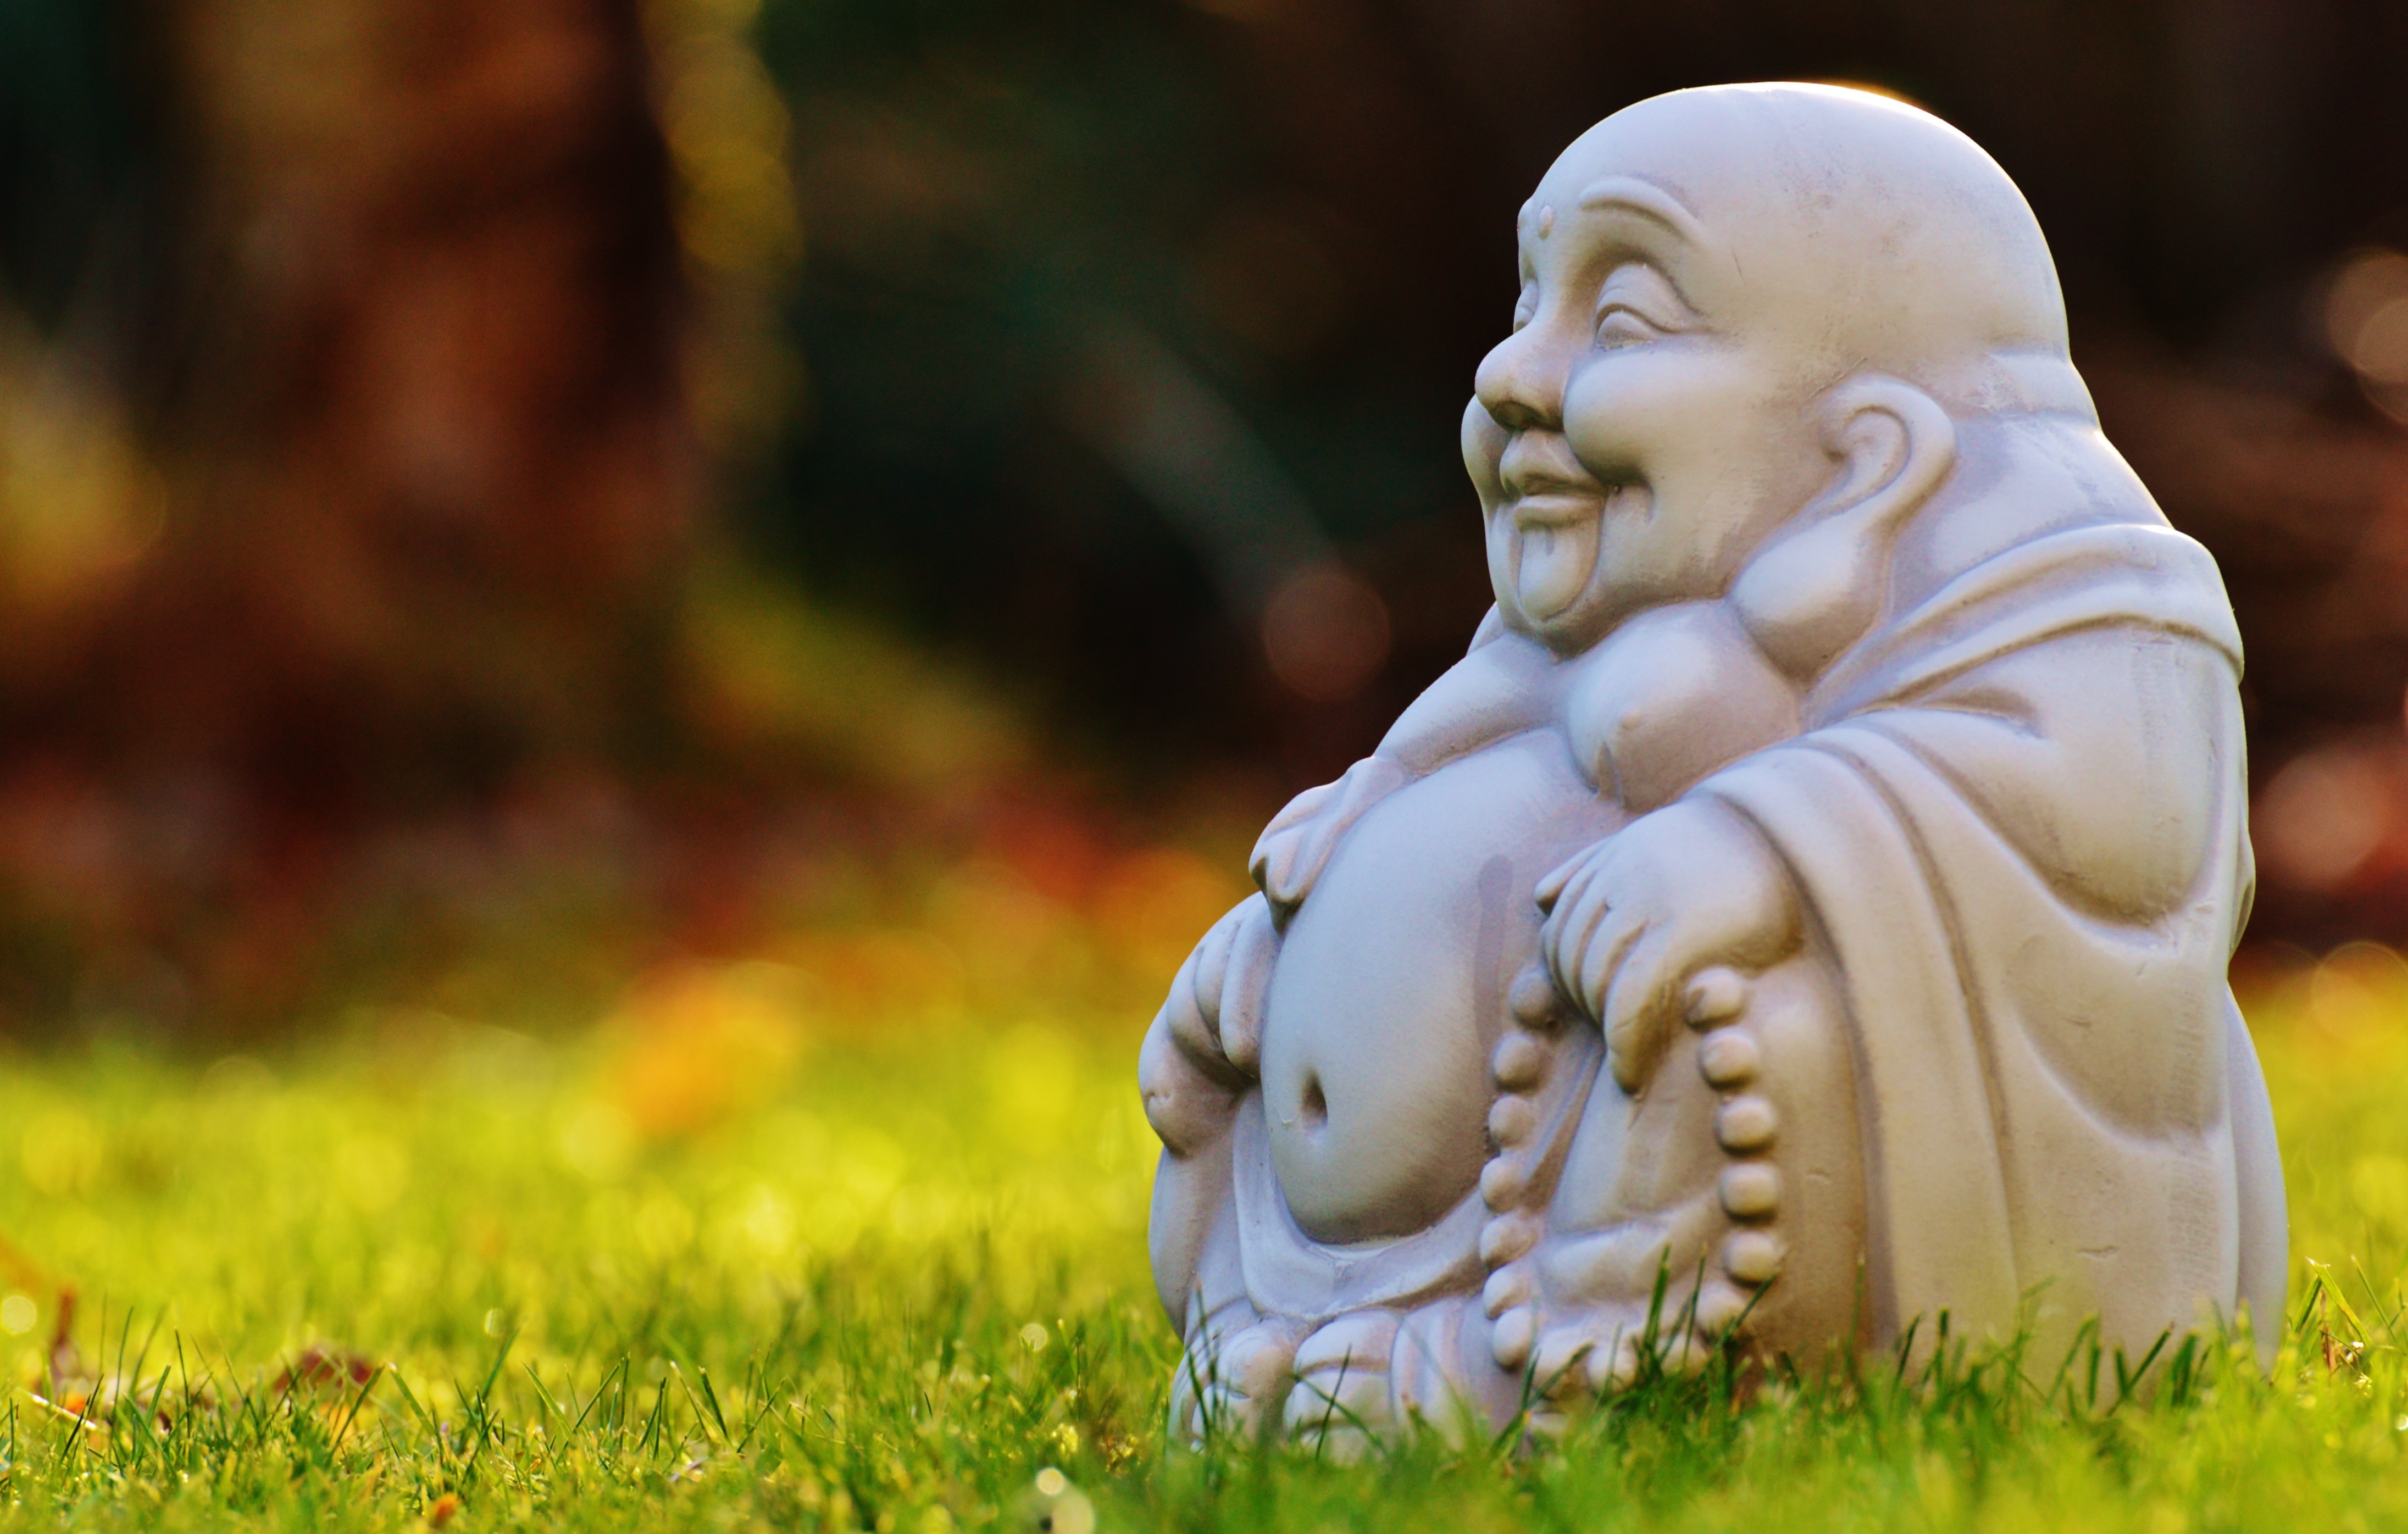 Sculpture, Stone Figure, Buddha, Figures, baby, laughing